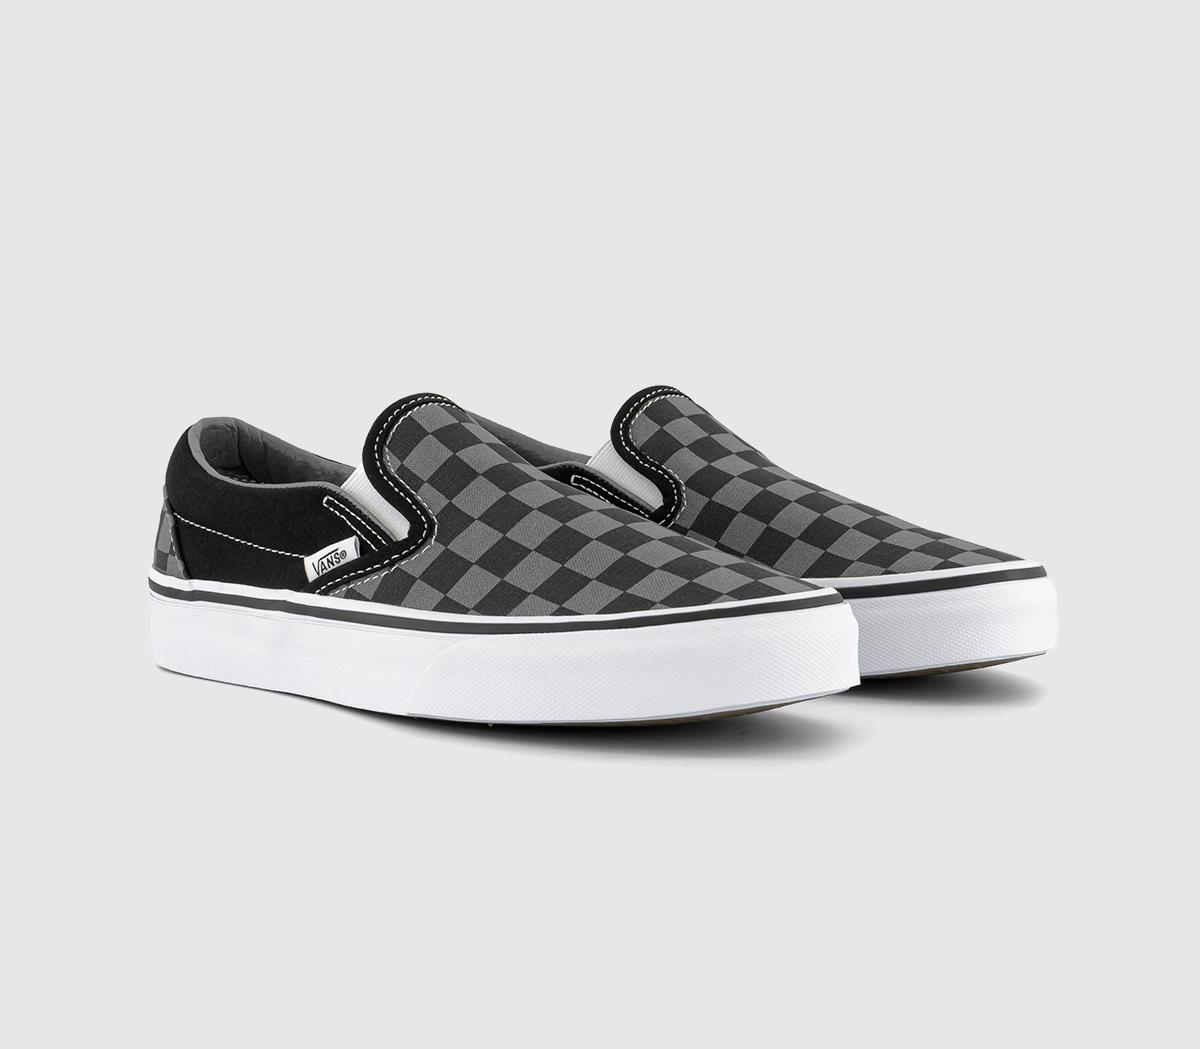 Vans Classic Slip On Trainers Black Pewter Check, 10.5